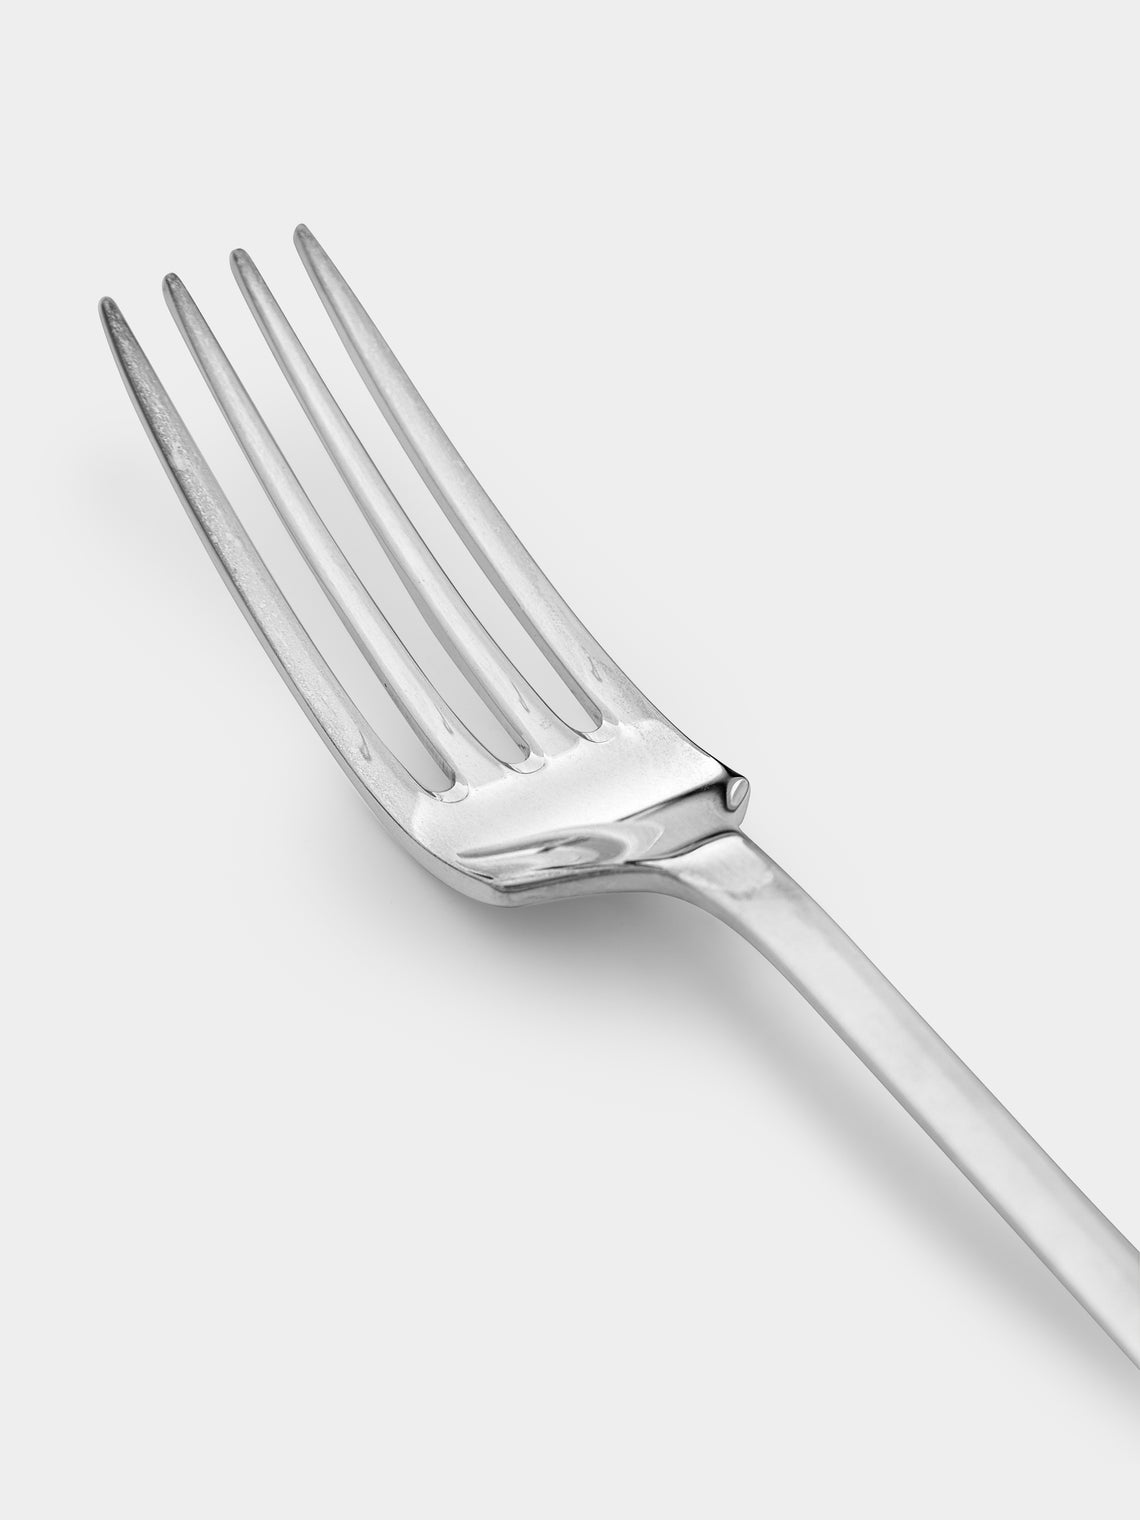 Emilia Wickstead - Florence Silver-Plated Table Fork -  - ABASK